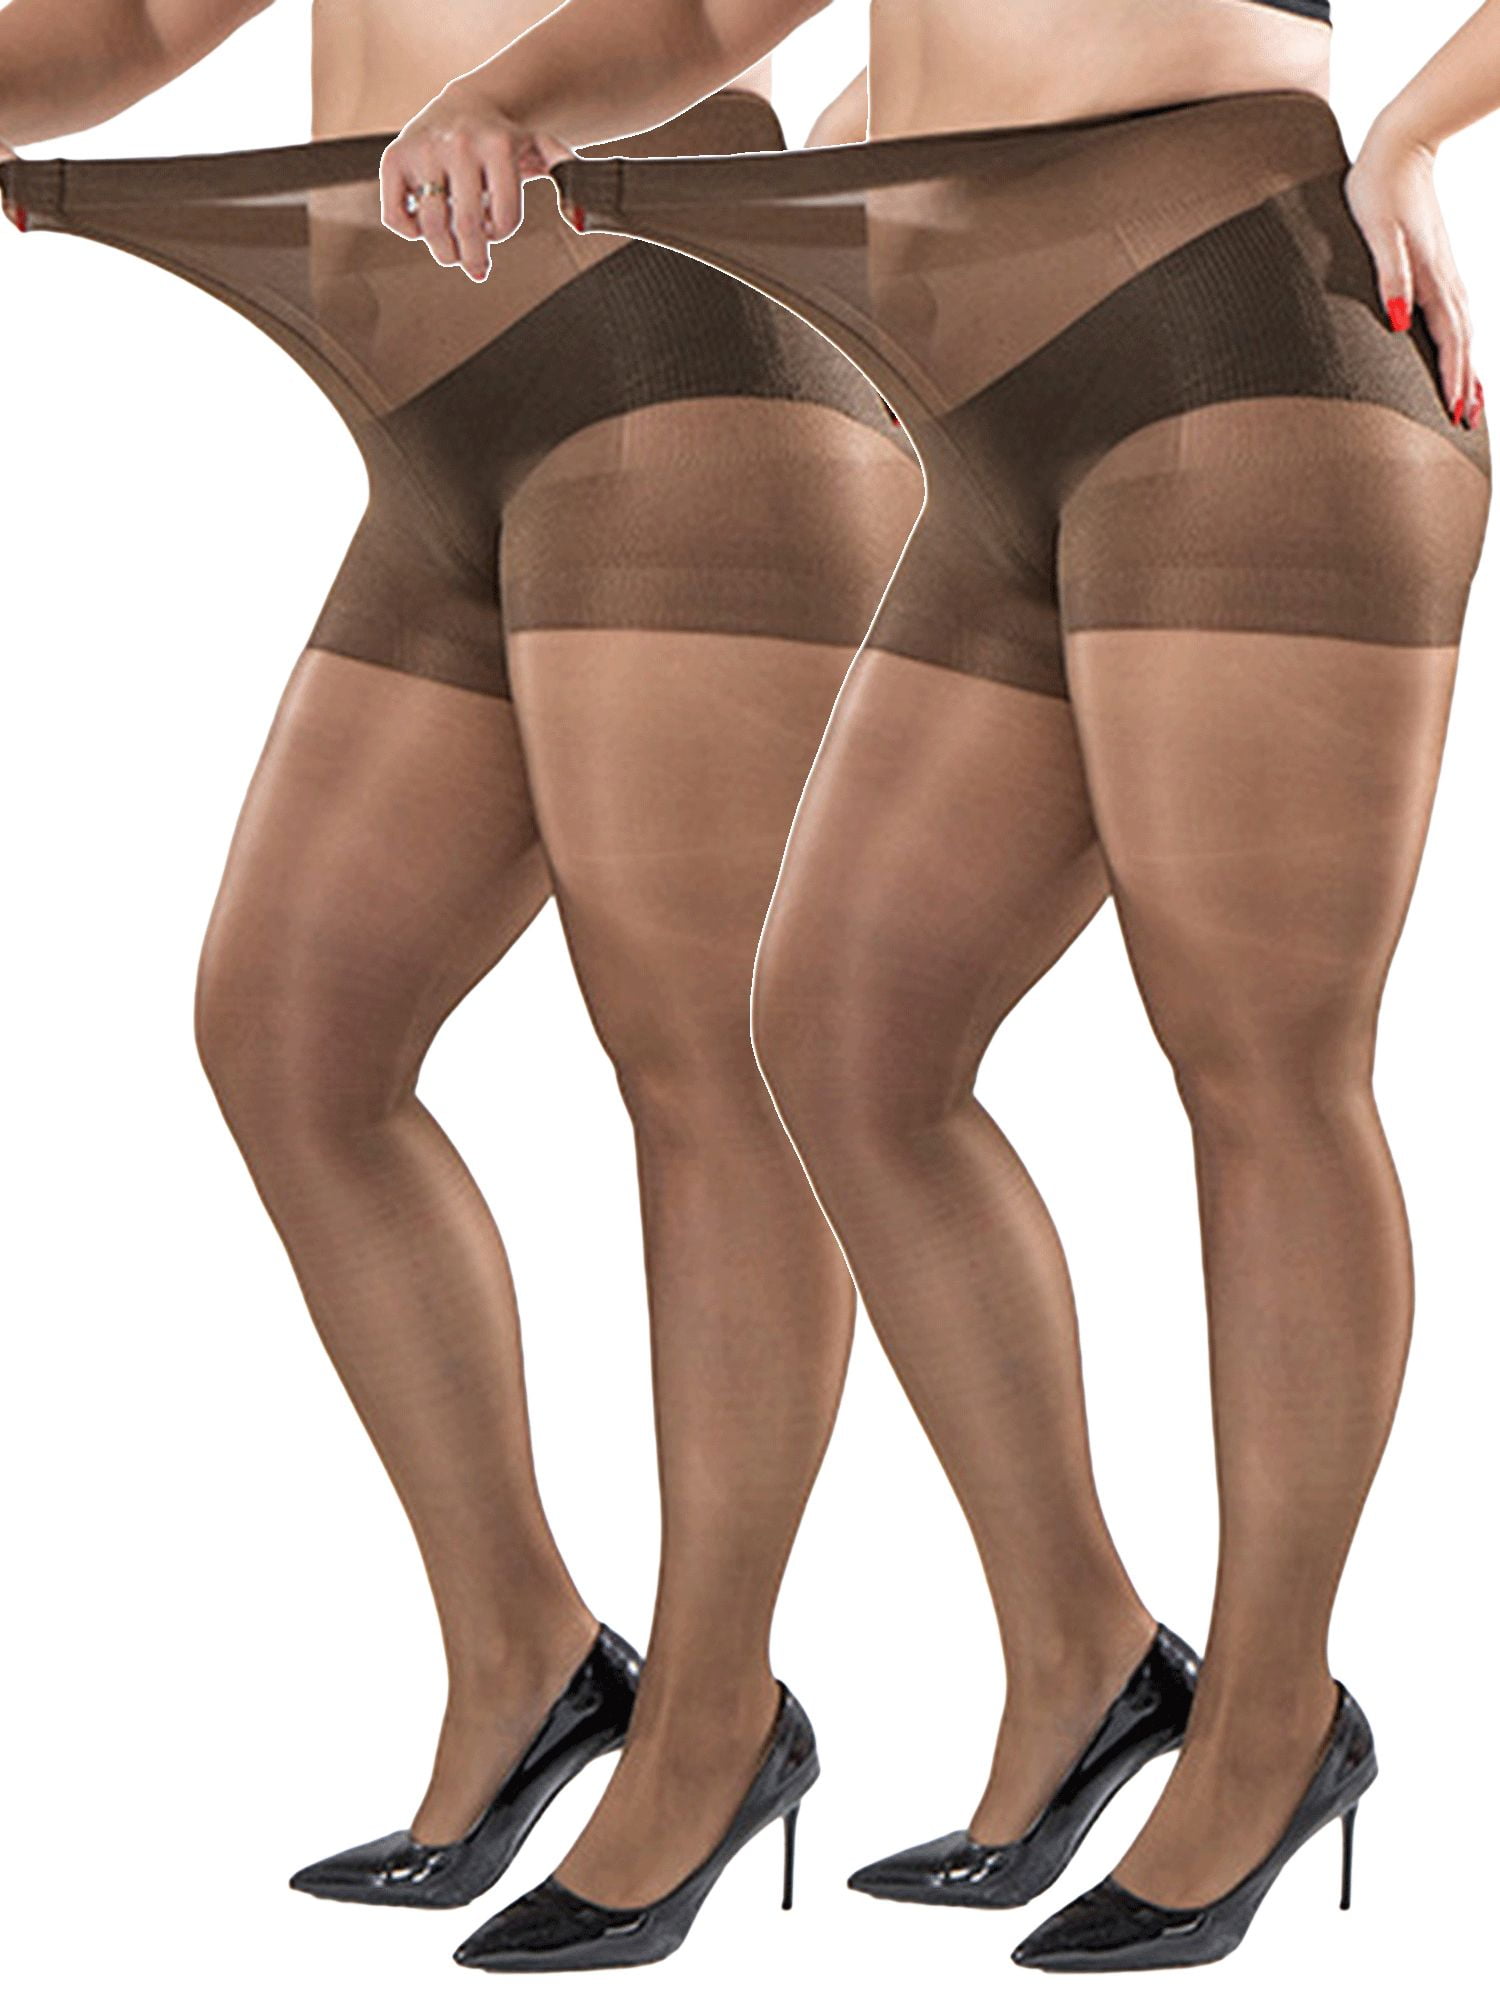 Spencer Plus Size Women's Ultra Sheer Tights Control Top Pantyhose with  Reinforced Toes, 2 Pack 